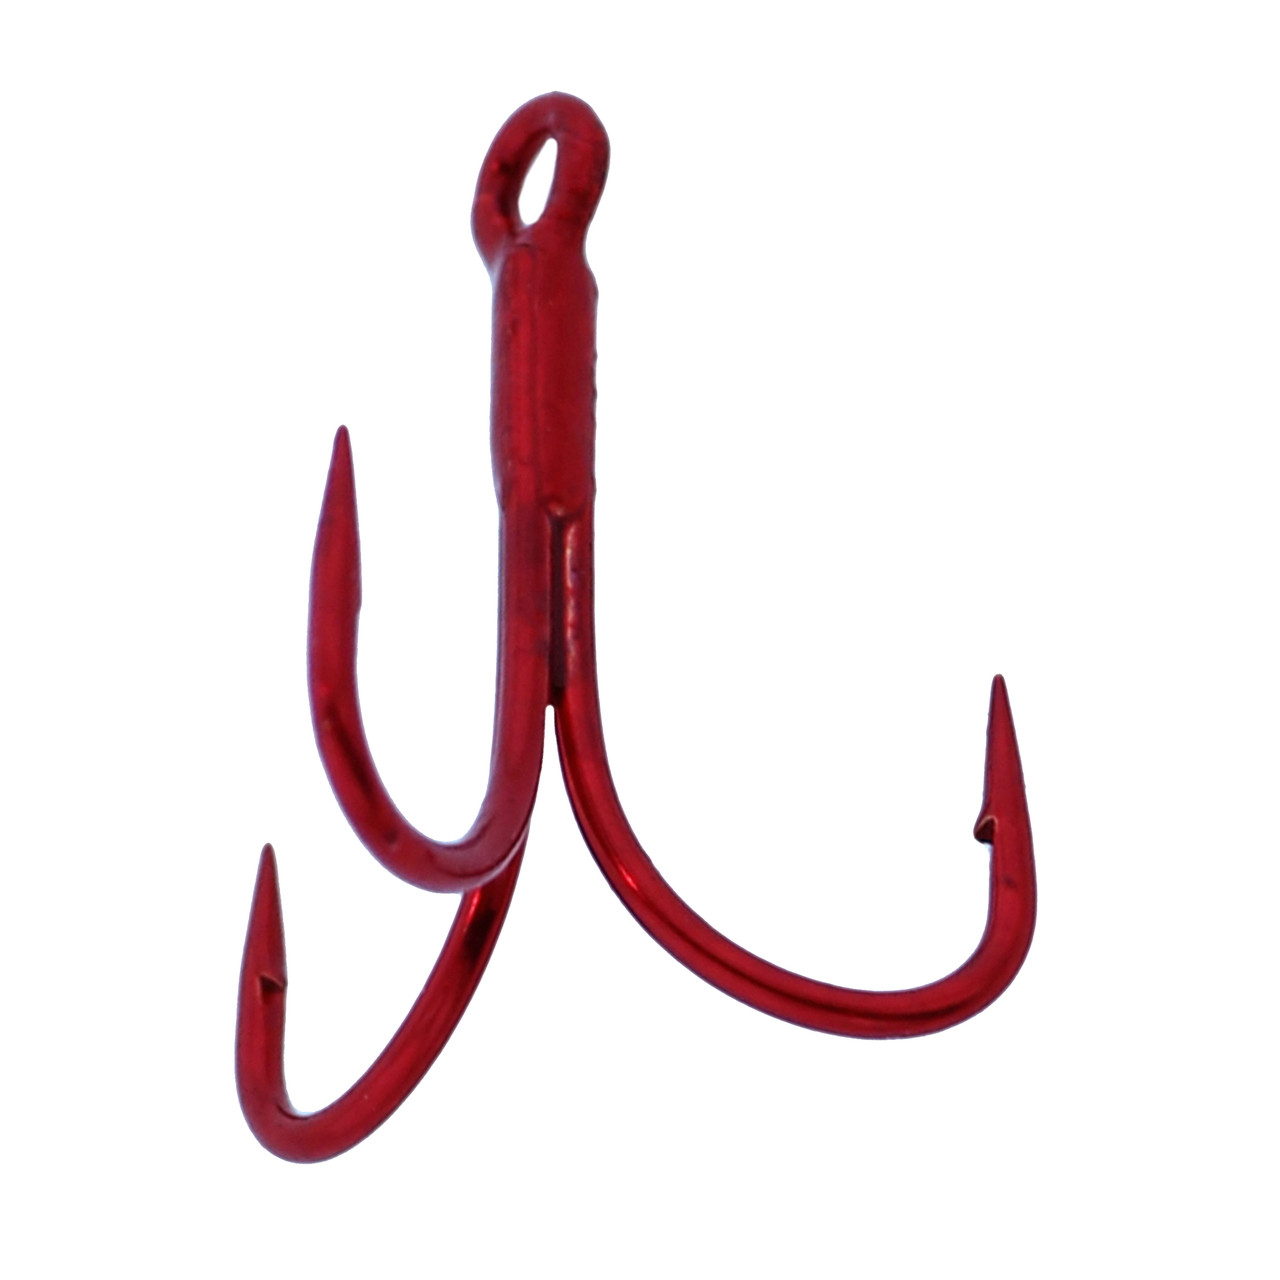 Gamakatsu Trout Treble Hooks-Size 14-Pack of 4-Red (273303) - Go